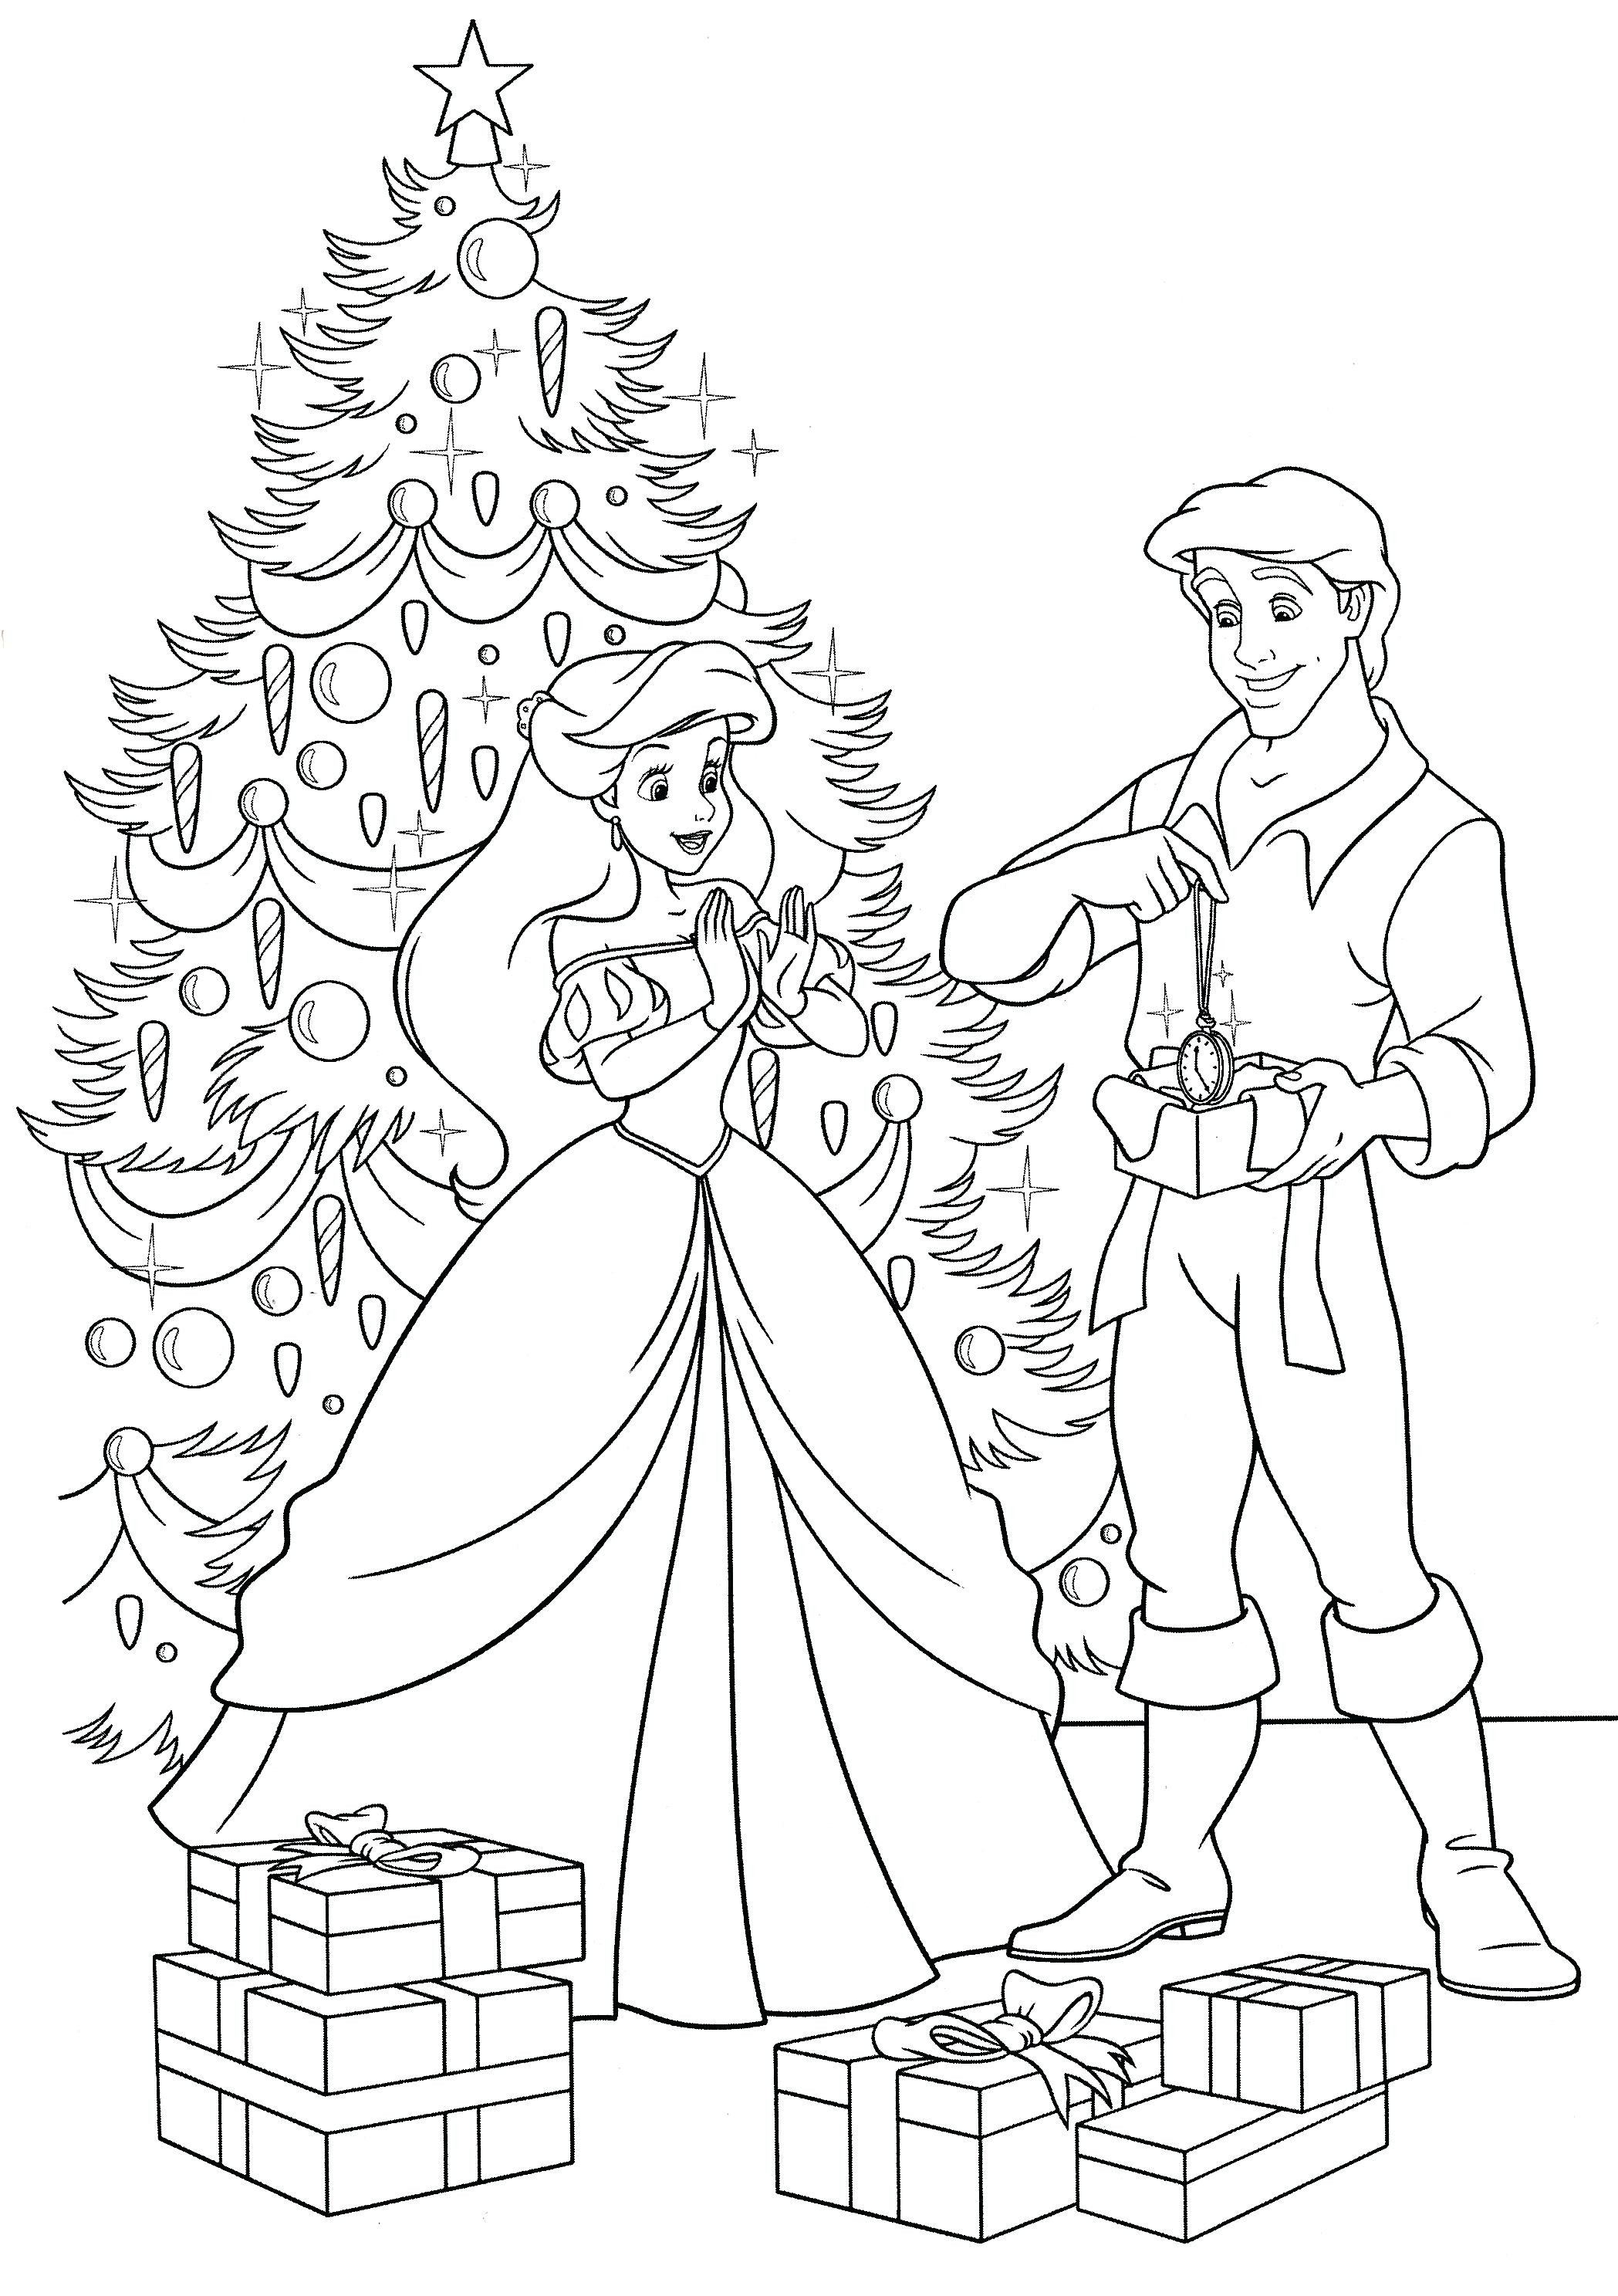 All Disney Princess Coloring Pages Games Unique Coloring Page Ariel Color Pages and Mermaid Coloring Page